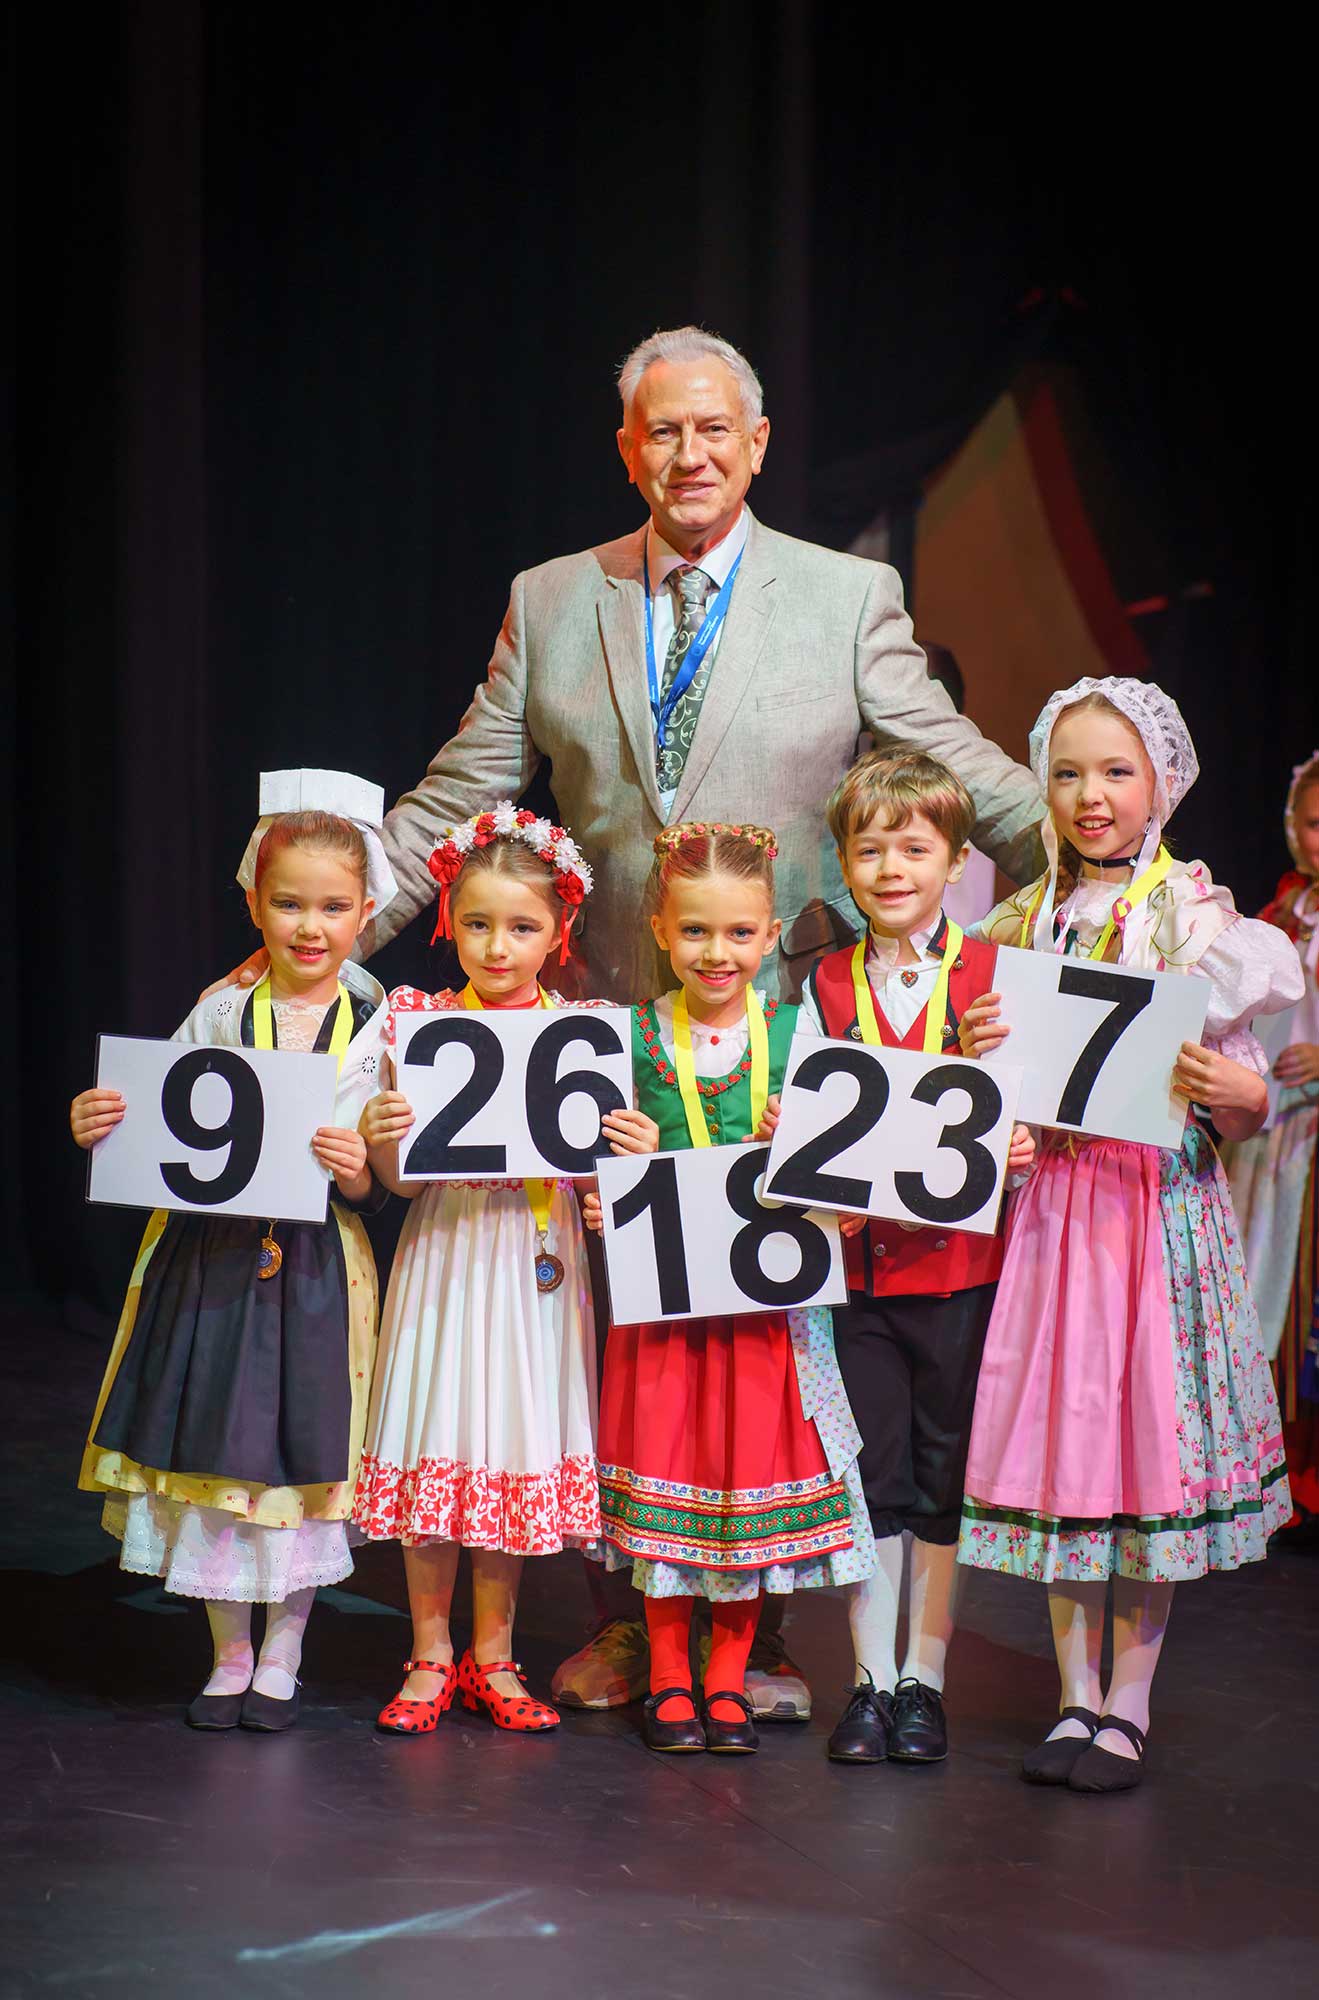 Winners: Junior Solo Class A  8 yrs and under